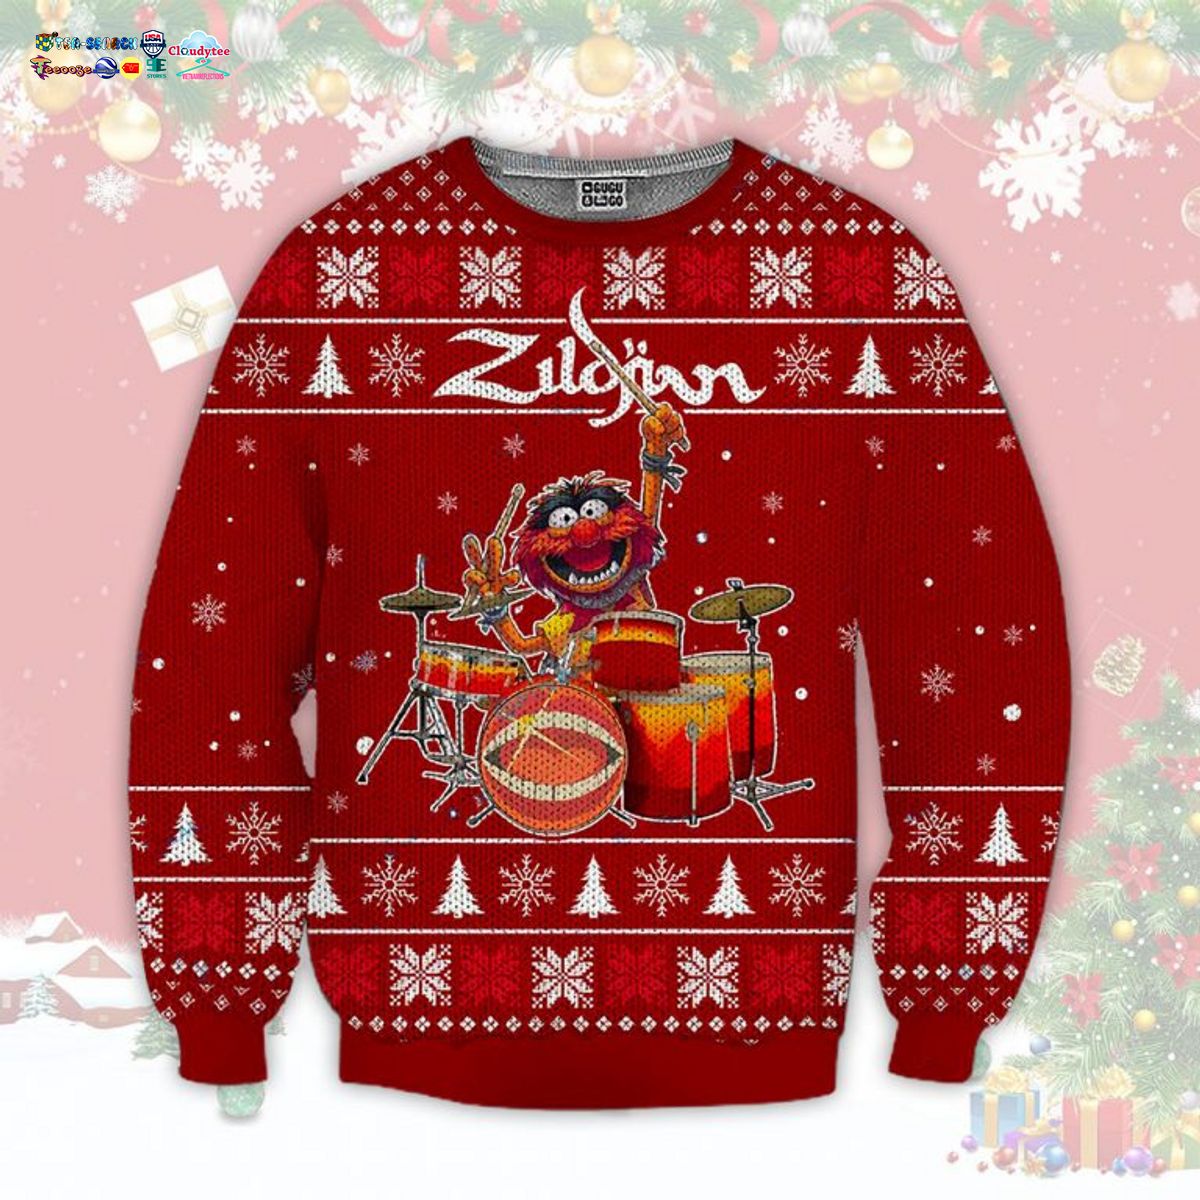 The Muppet Show Zildjian Ugly Christmas Sweater - Eye soothing picture dear